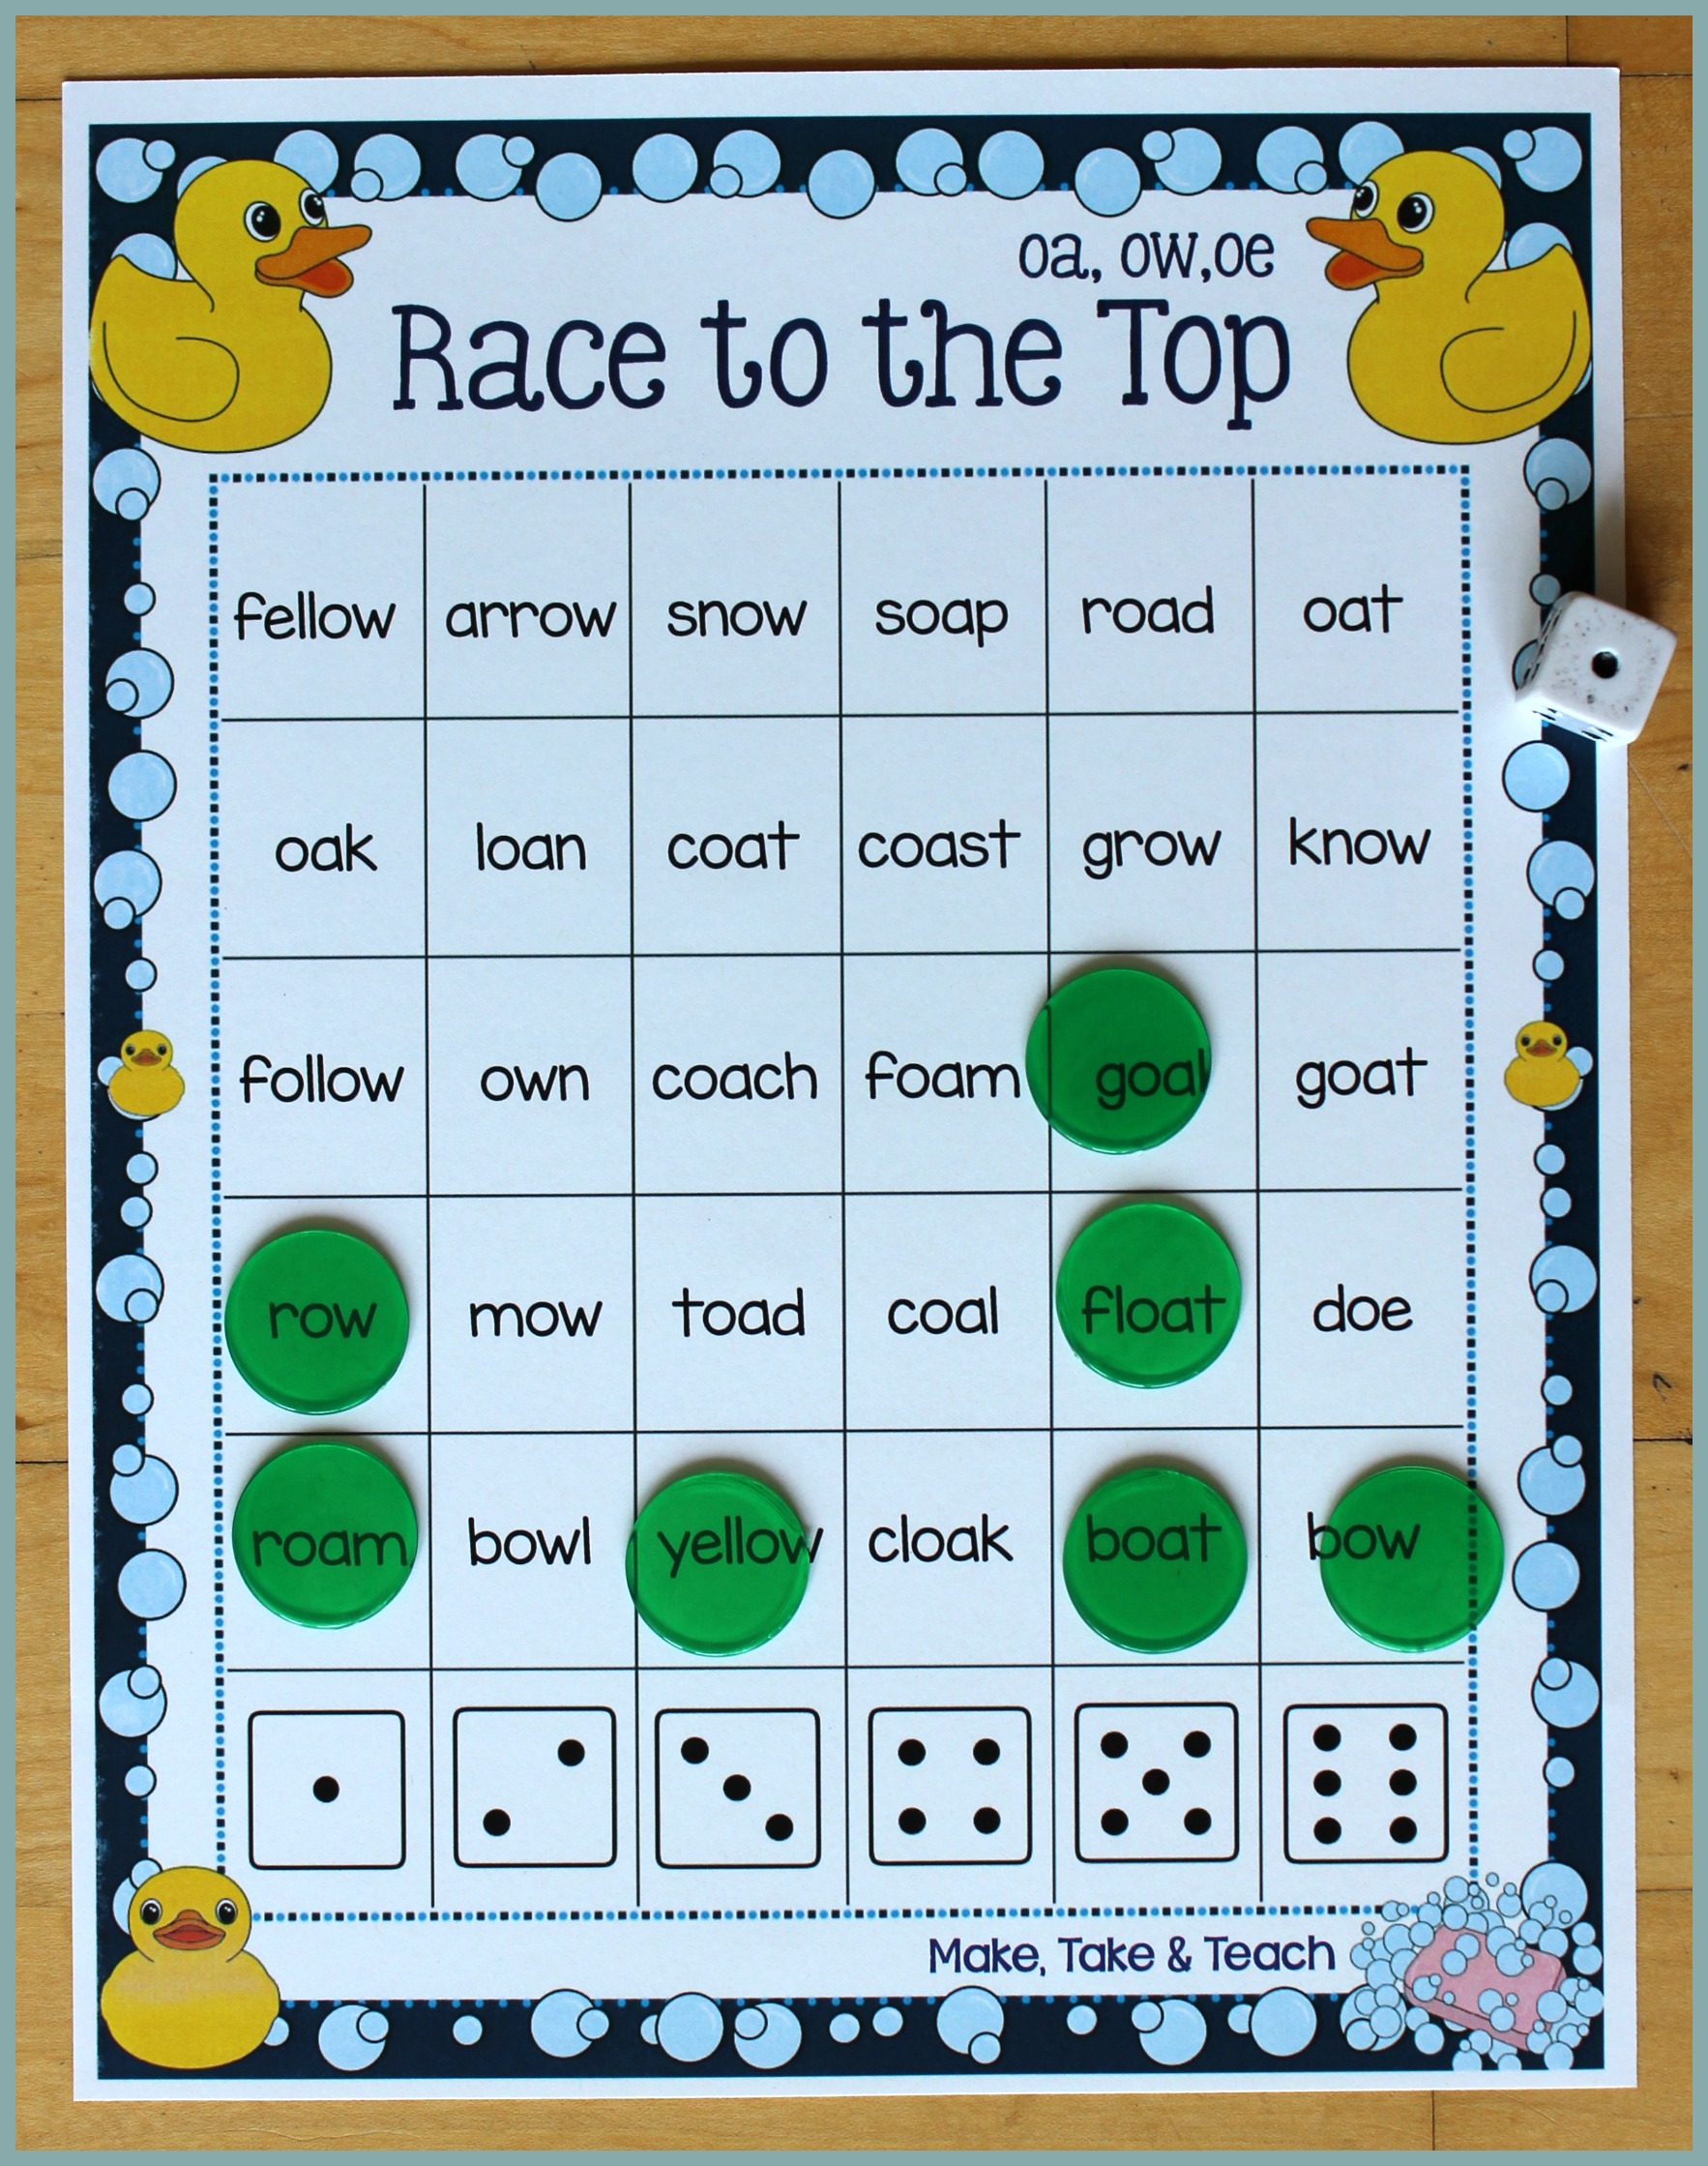 activities-for-teaching-the-oa-ow-oe-digraphs-make-take-teach